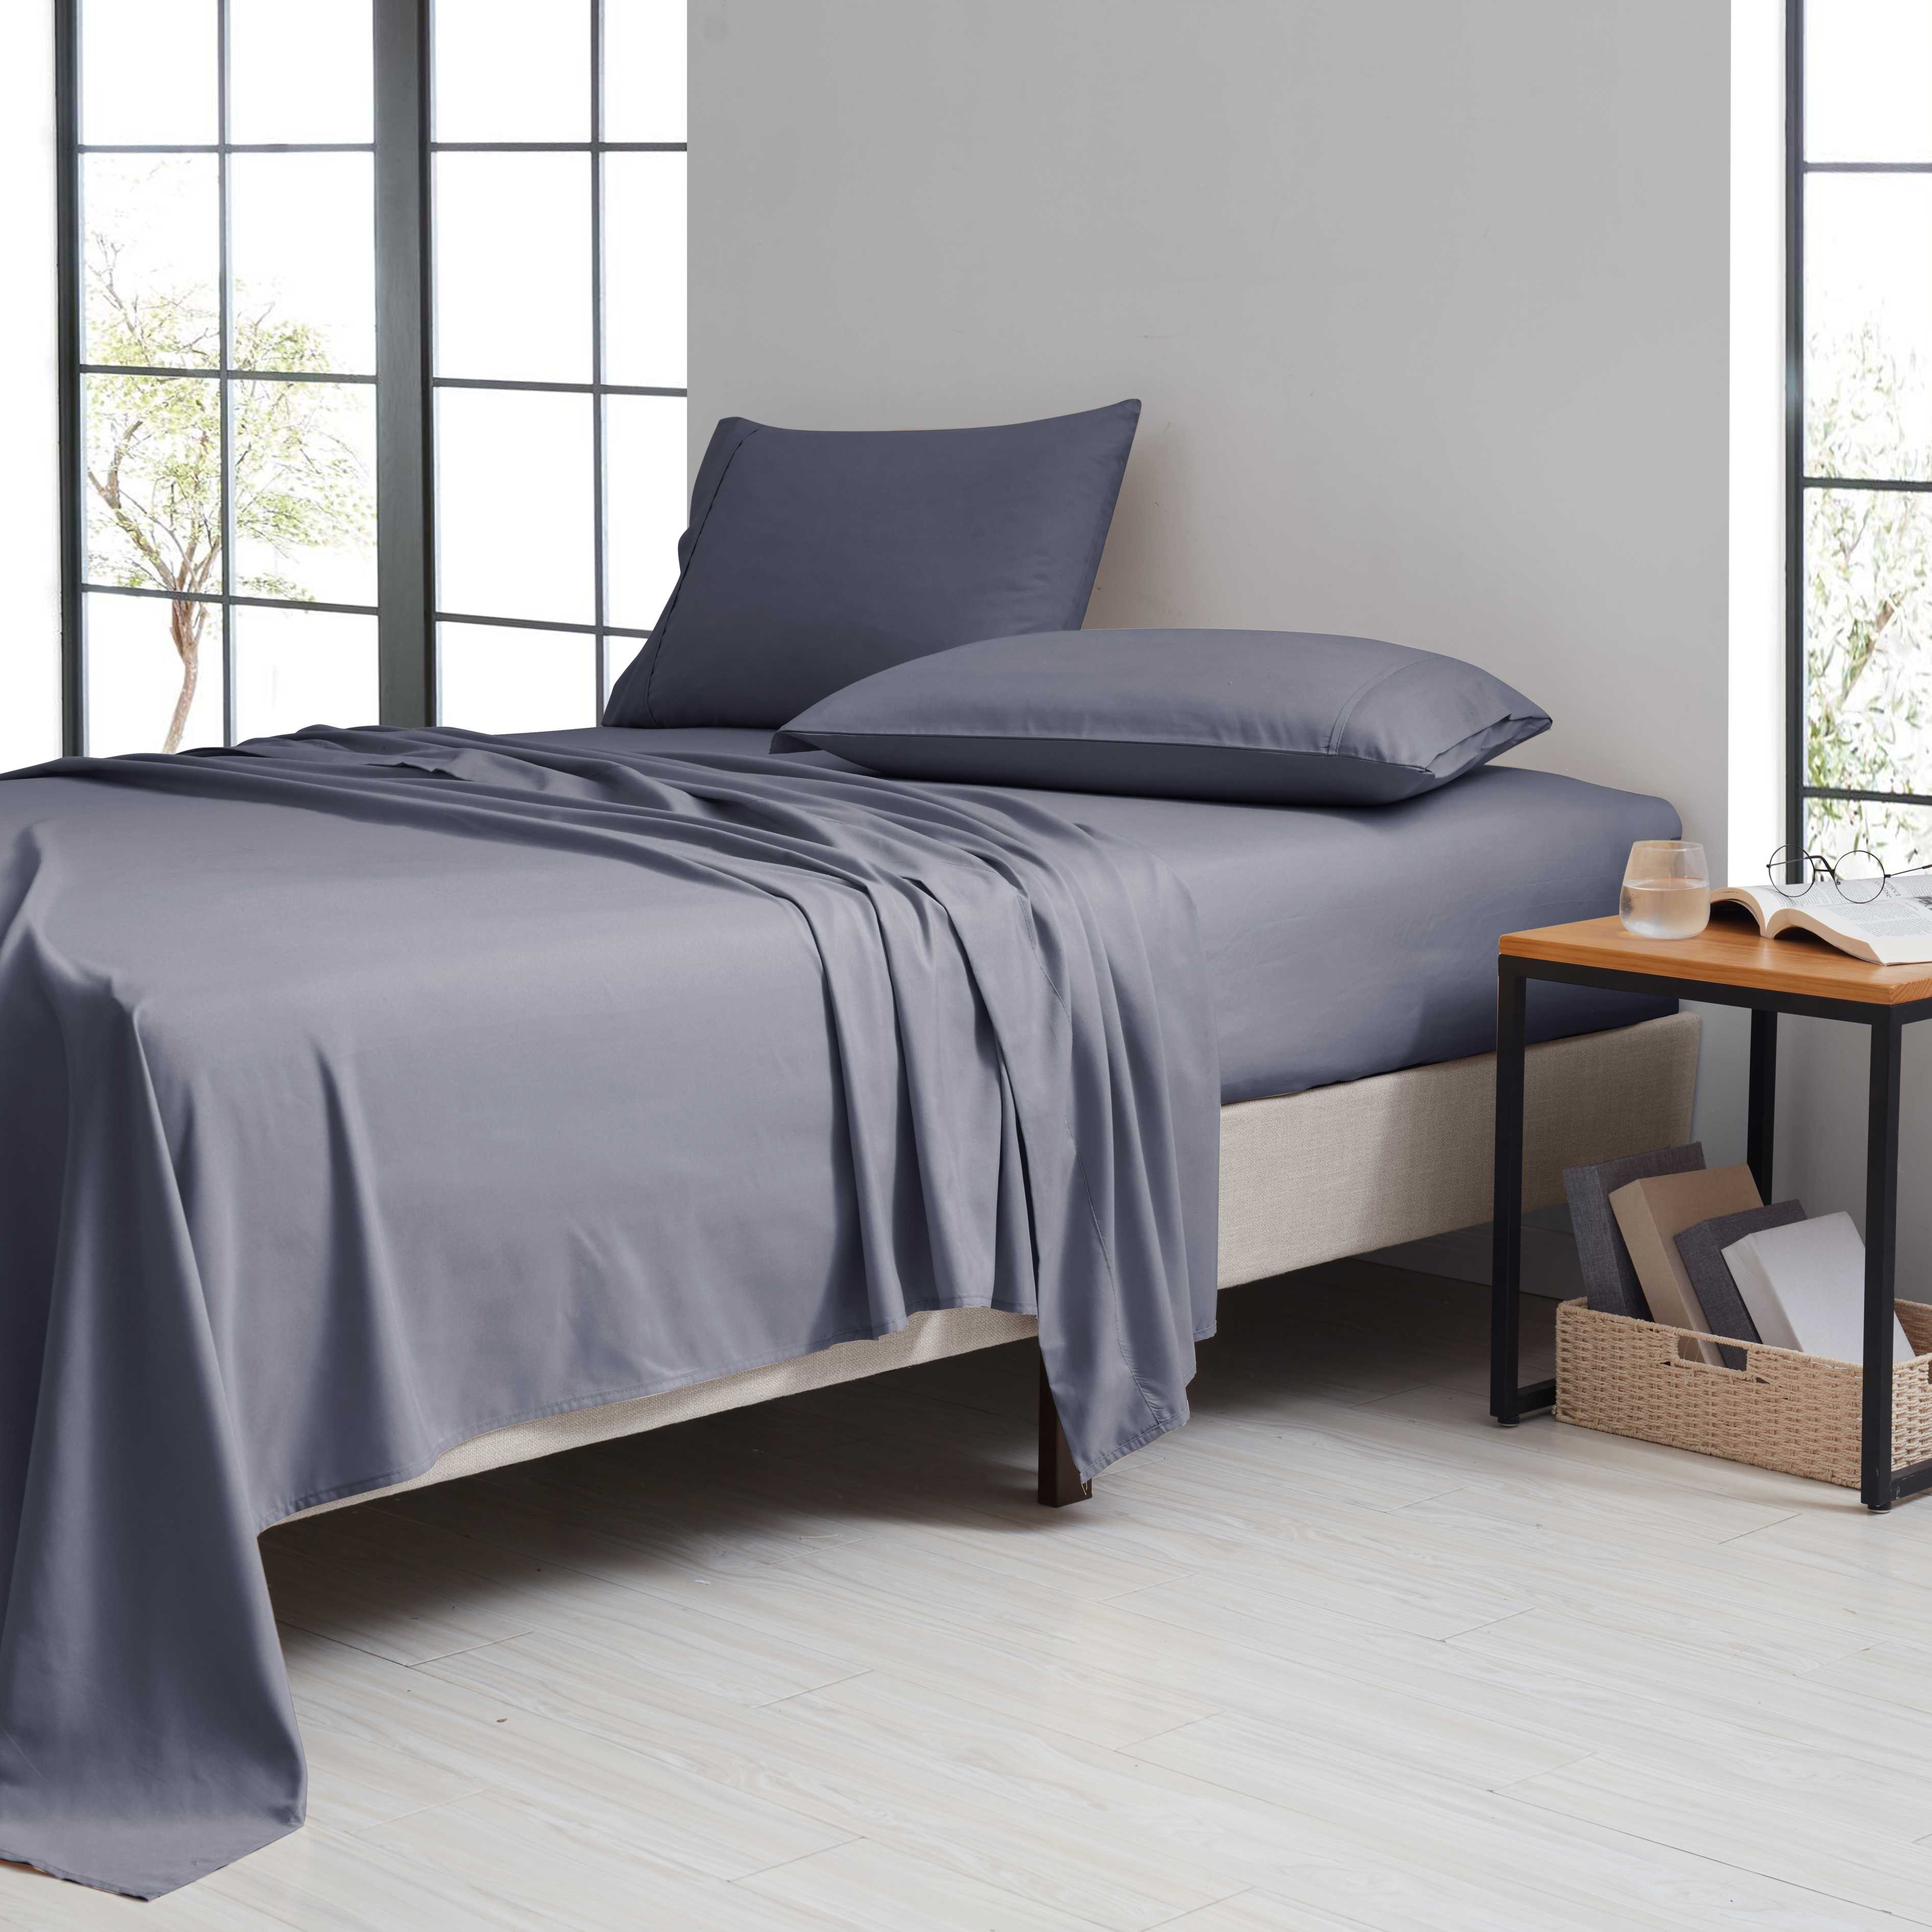 Bamboo 1800 Thread Count 4 Piece Luxury Solid Sheet Set. - Bed Bath Fashions